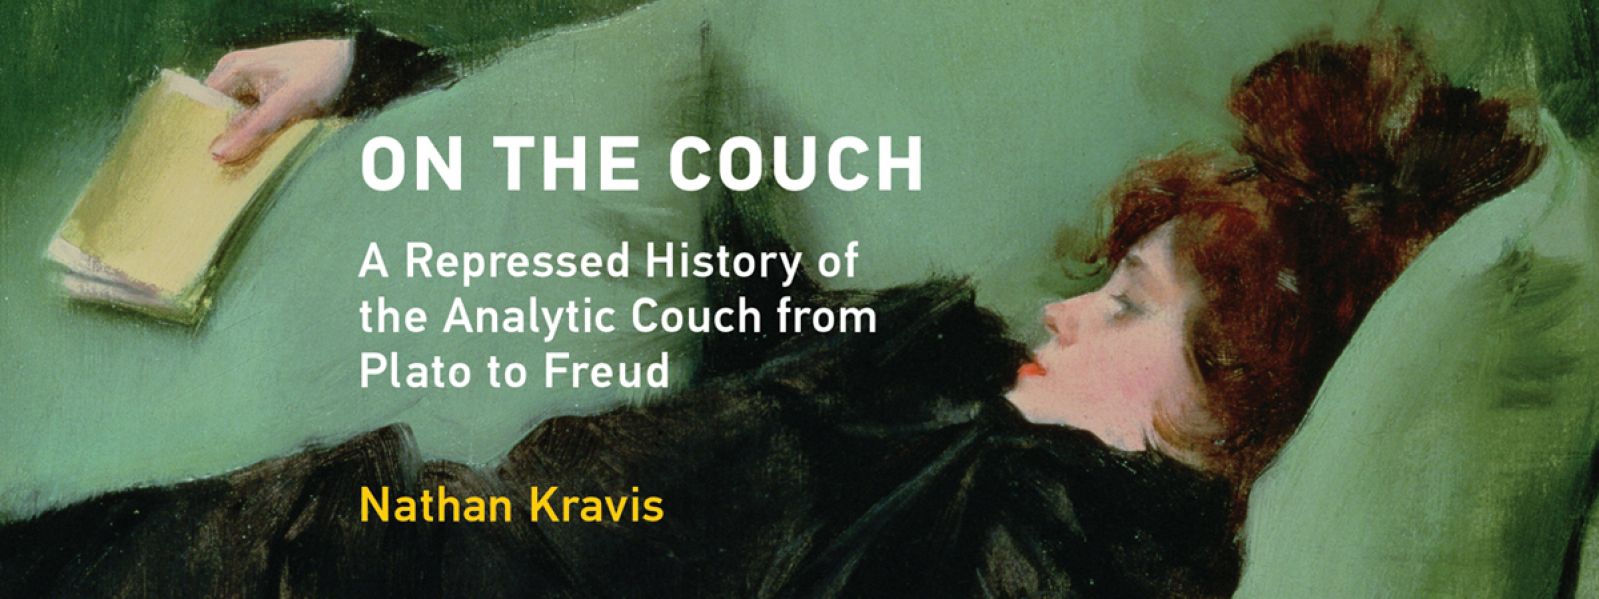 Front cover of 'On the Couch: A Repressed History of the Analytic Couch from Plato to Freud' by Nathan Kravis, features a painting of a woman reclining on a couch.